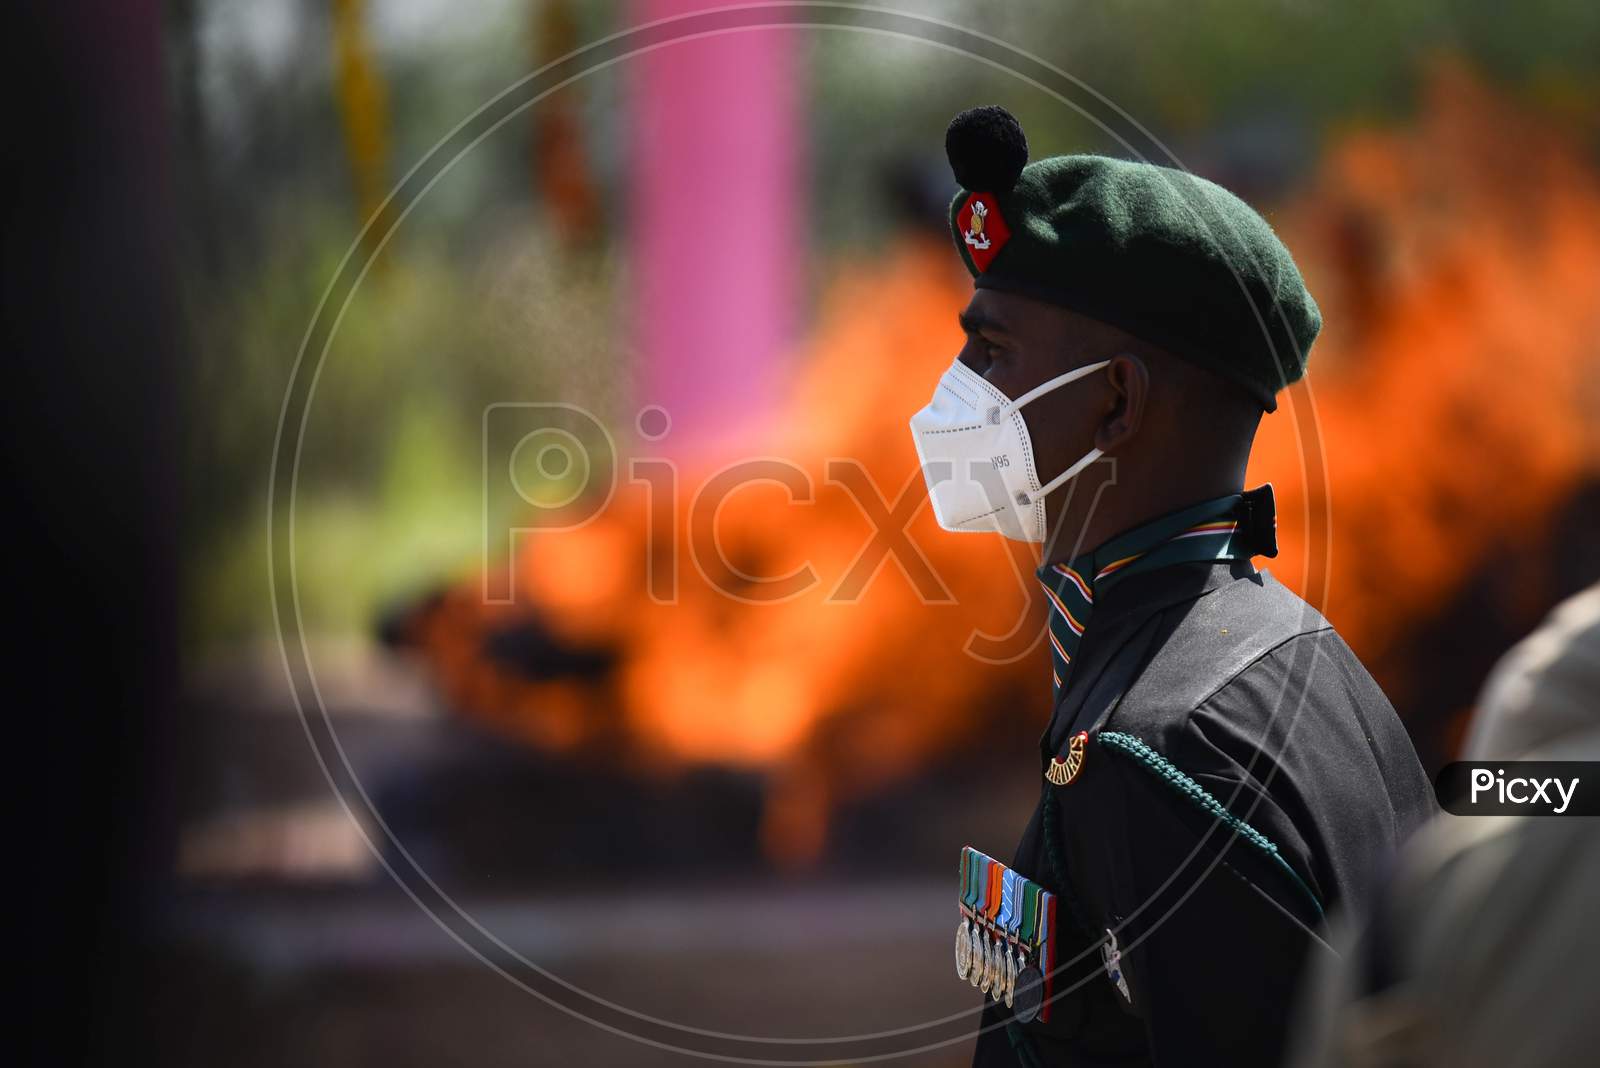 A soldier stands guard at the funeral of soldier Ryada Mahesh, 26, from Telangana's Nizamabad district, who was martyred in the encounter along with three others at Machil sector of Kupwara district in Jammu and Kashmir on Sunday.